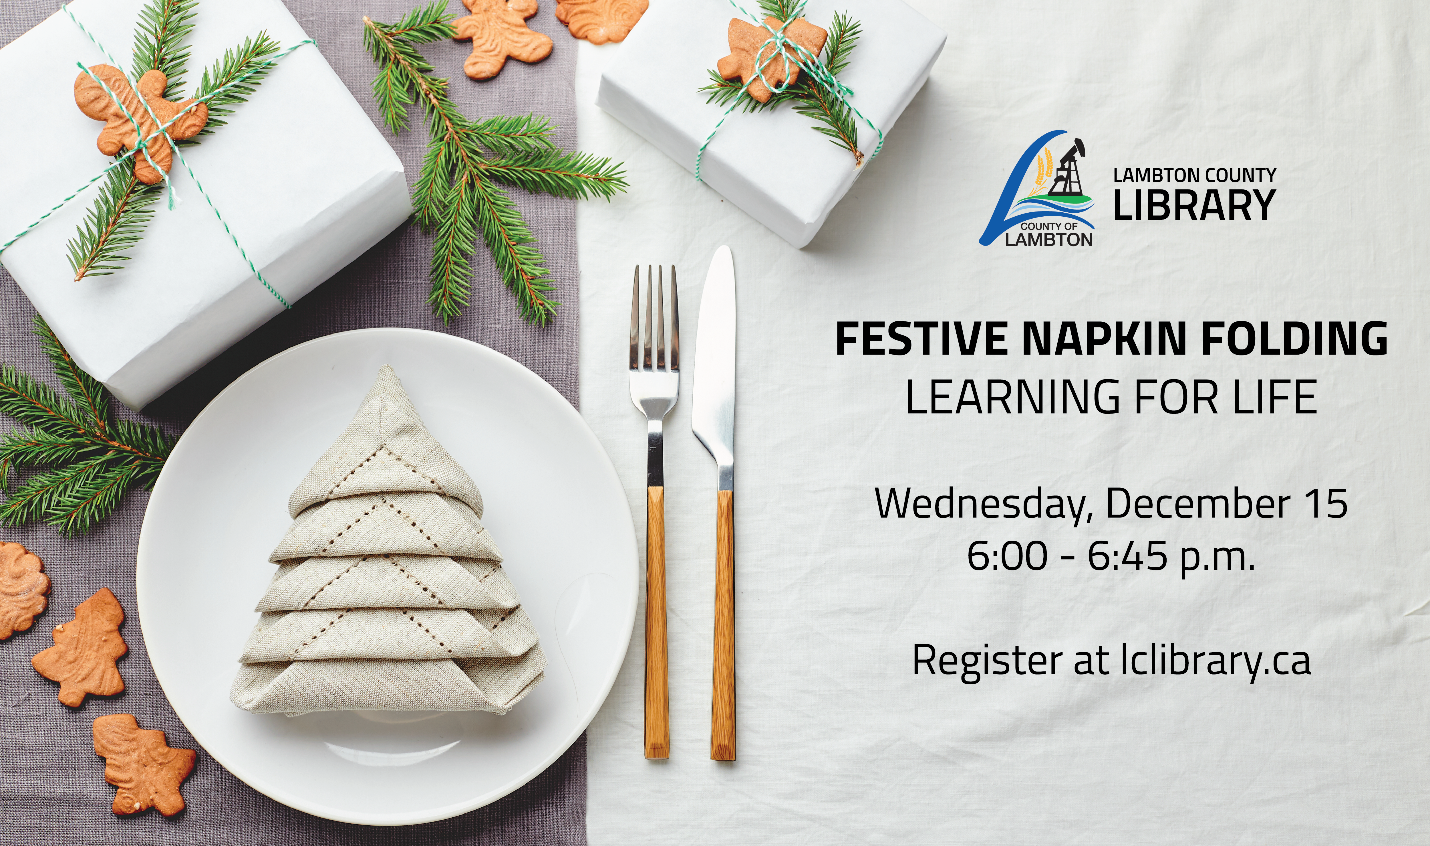 Napkin folded in the shape of a Christmas Tree on a plate